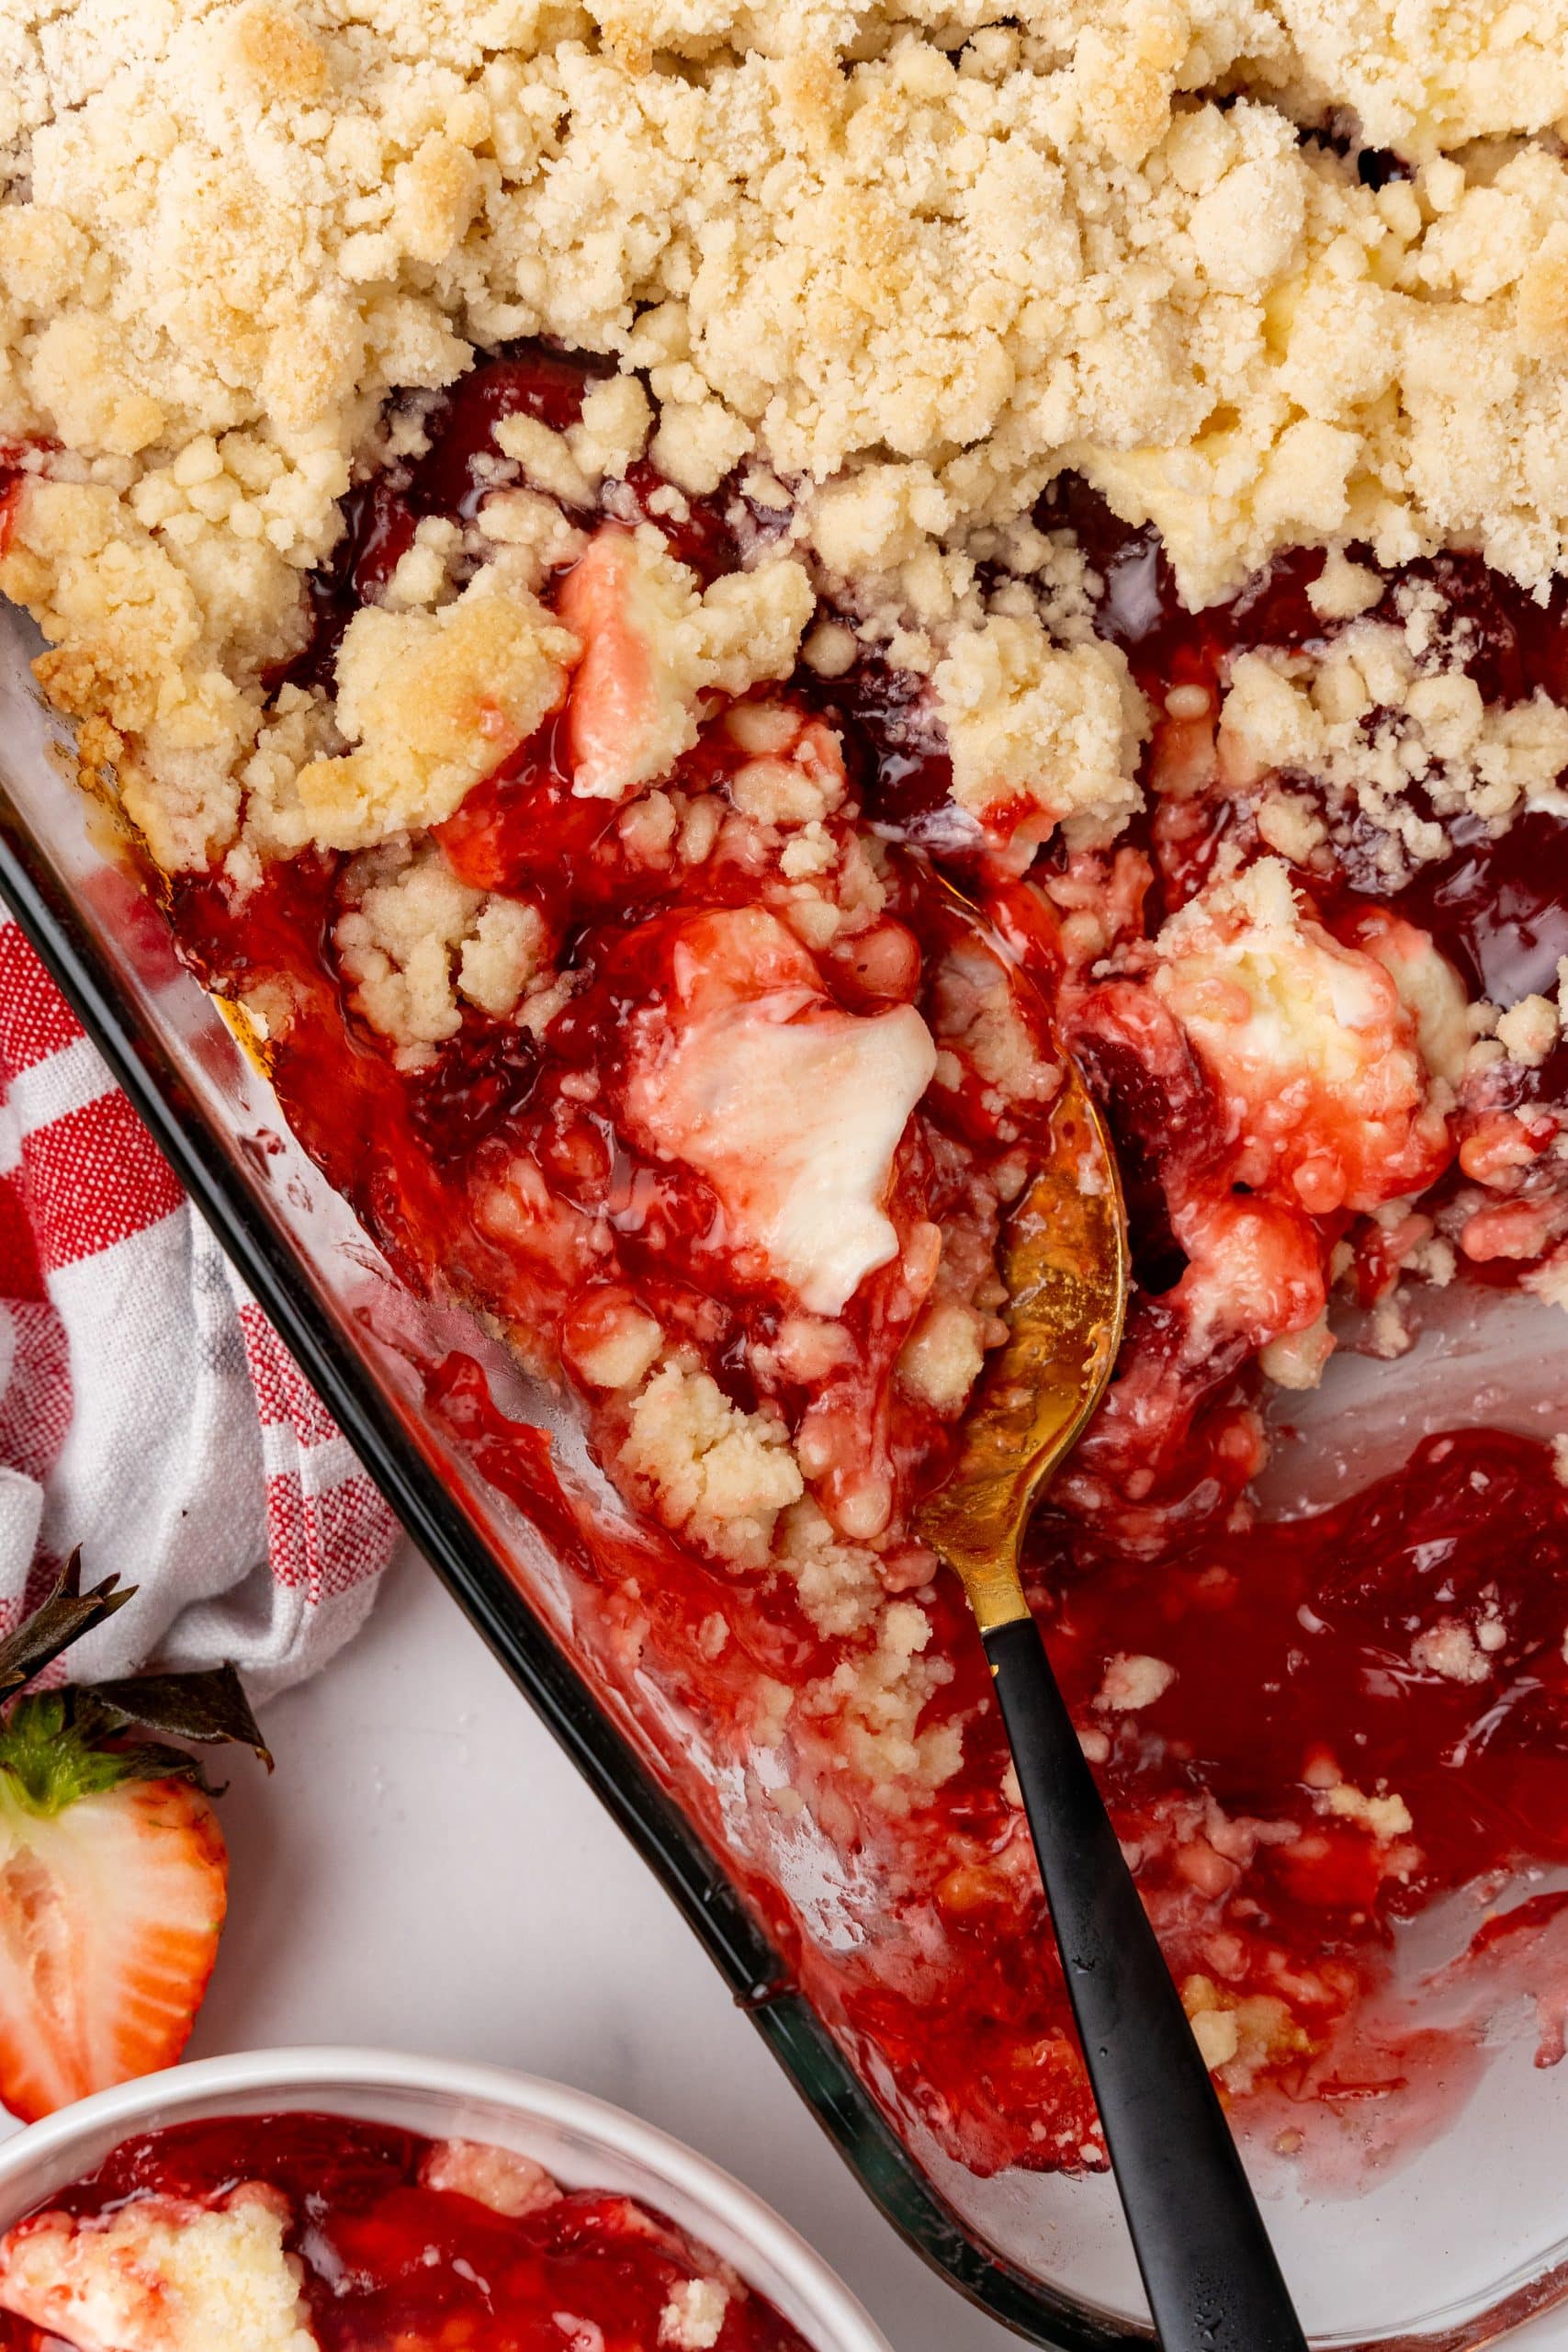 a spoon resting in a glass baking dish filled with baked strawberry dump cake